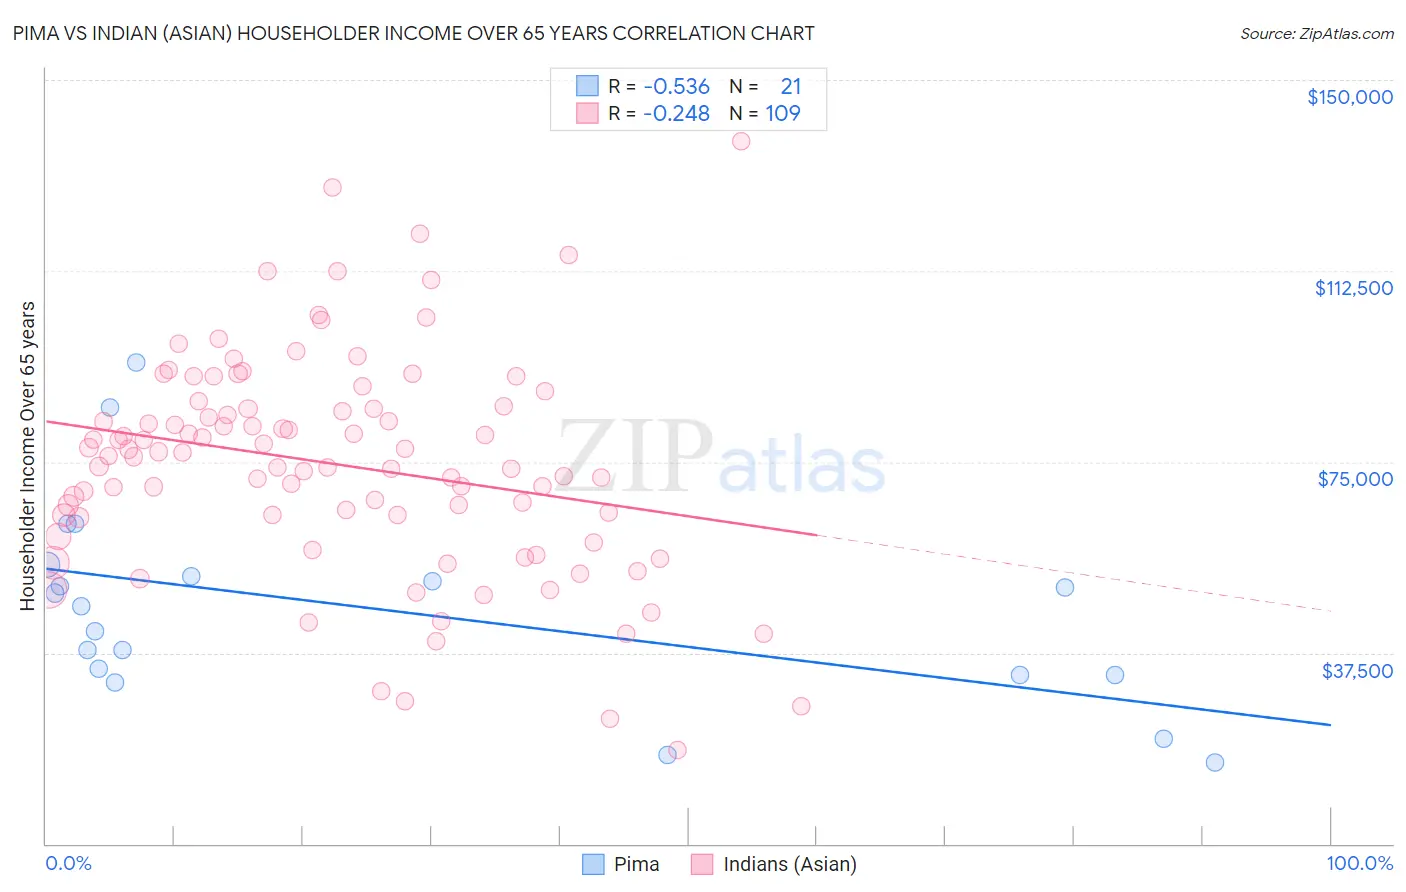 Pima vs Indian (Asian) Householder Income Over 65 years